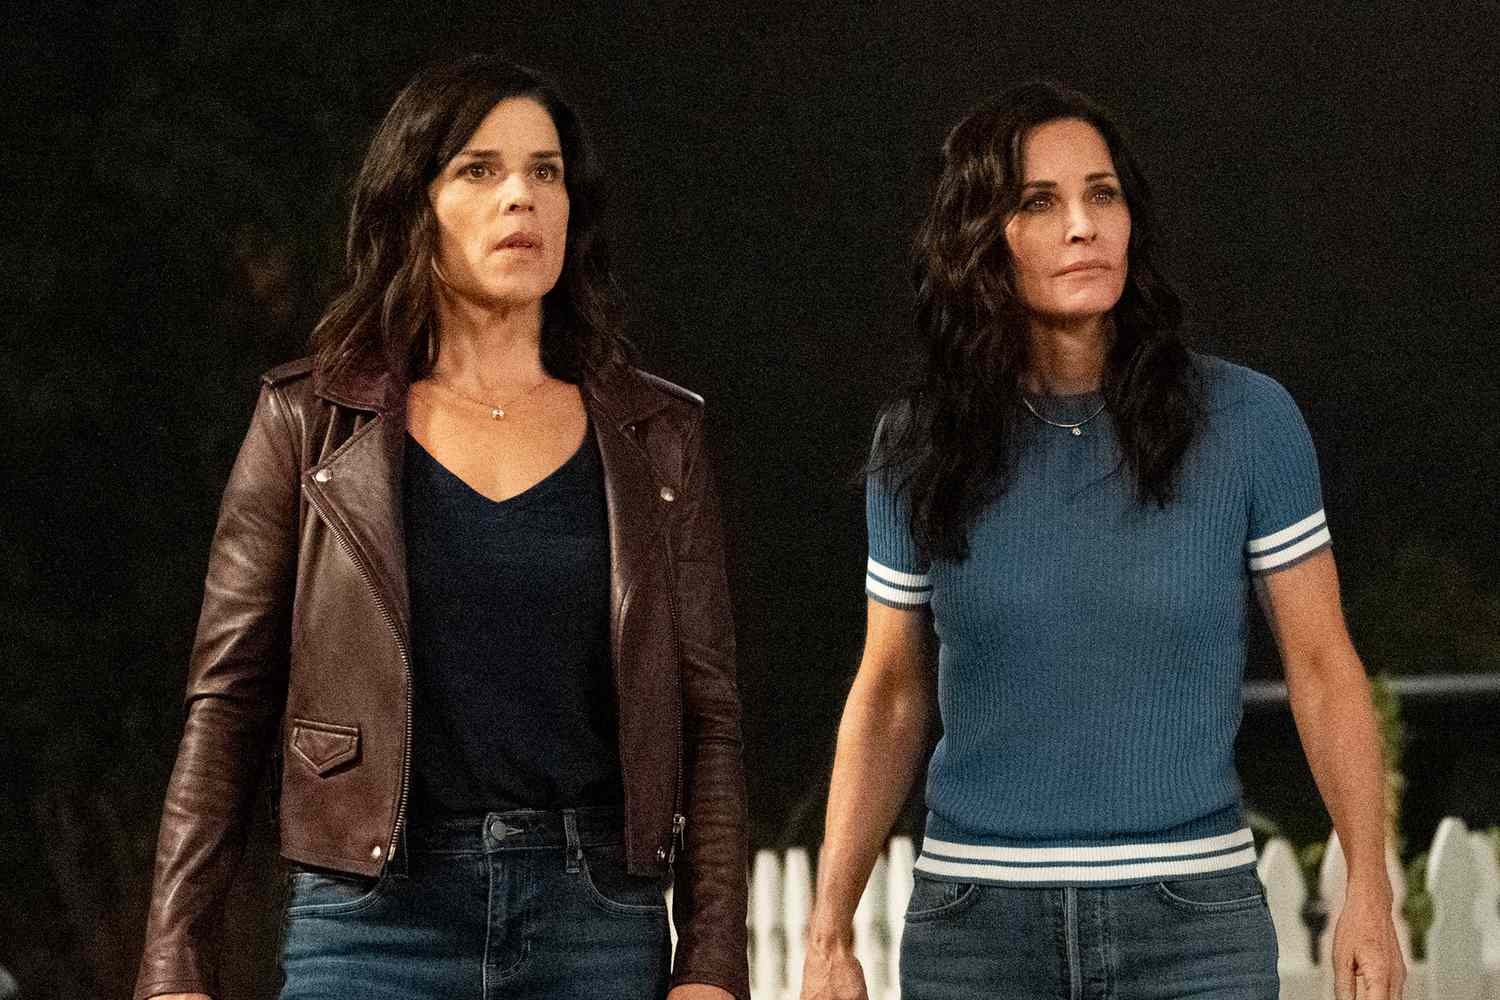 Neve Campbell and Courteney Cox in a still from the Scream series | Paramount Pictures